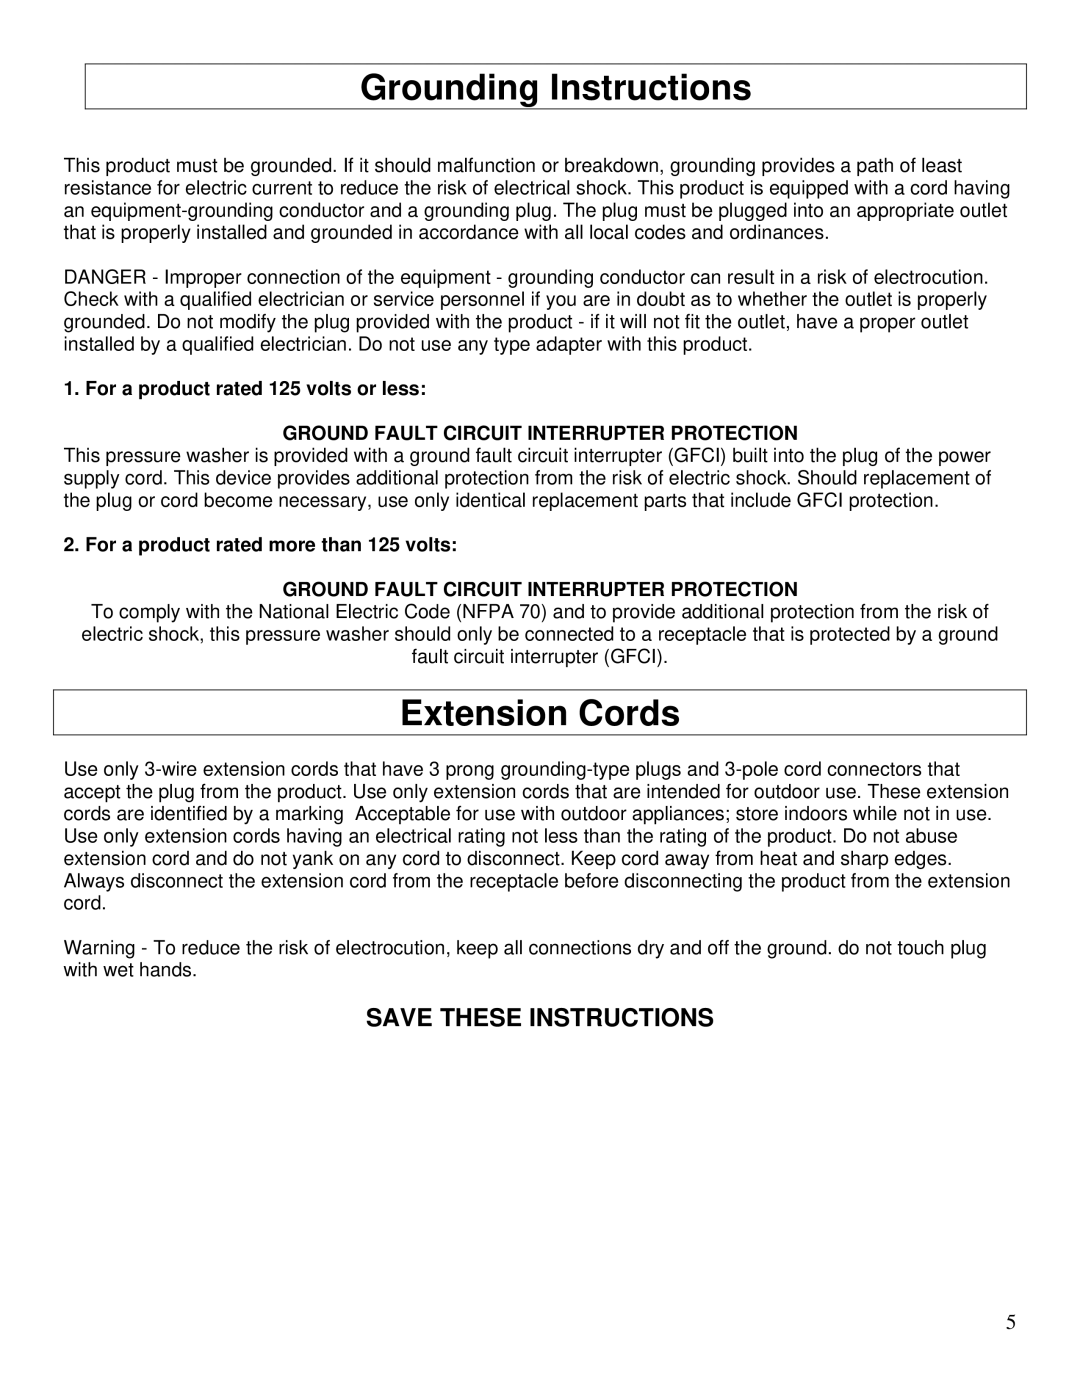 North Star M1573001A owner manual Grounding Instructions, Extension Cords 